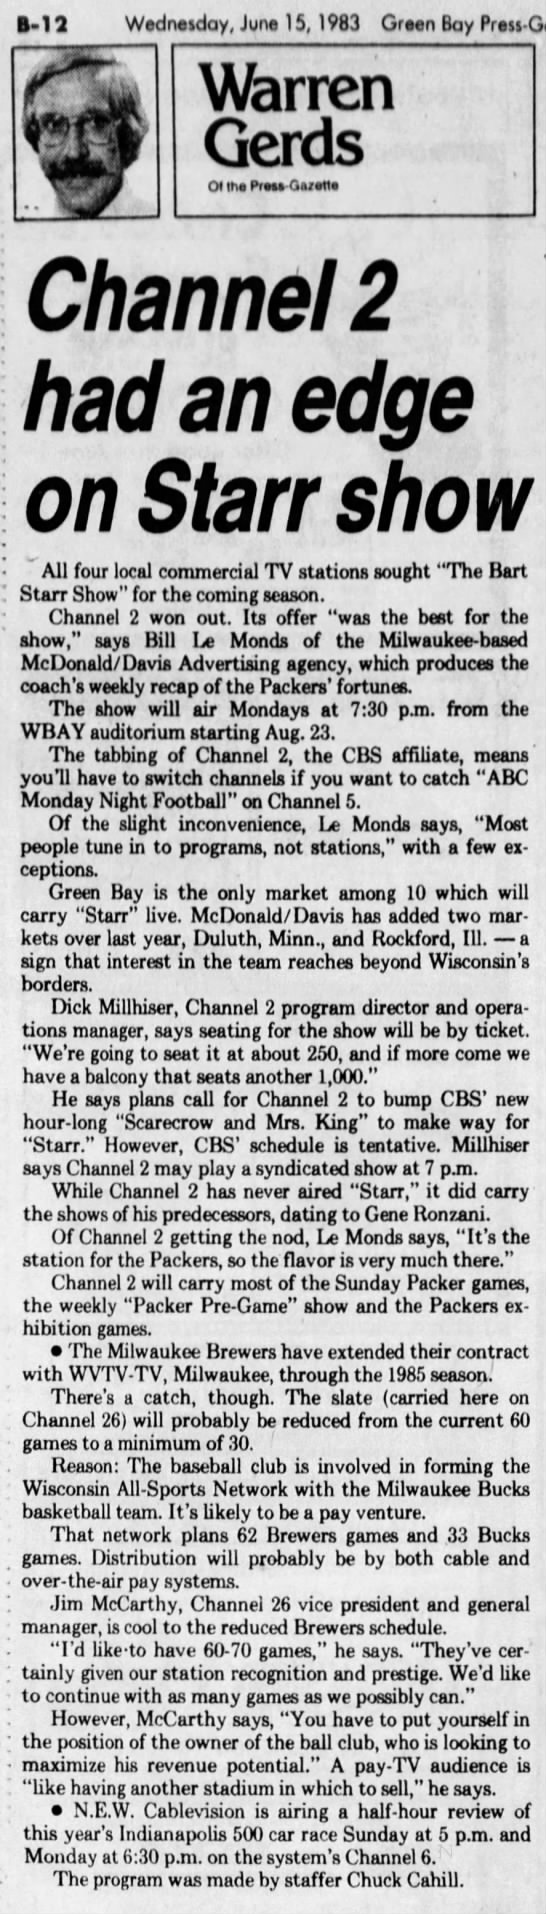 Channel 2 had an edge on Starr show - 